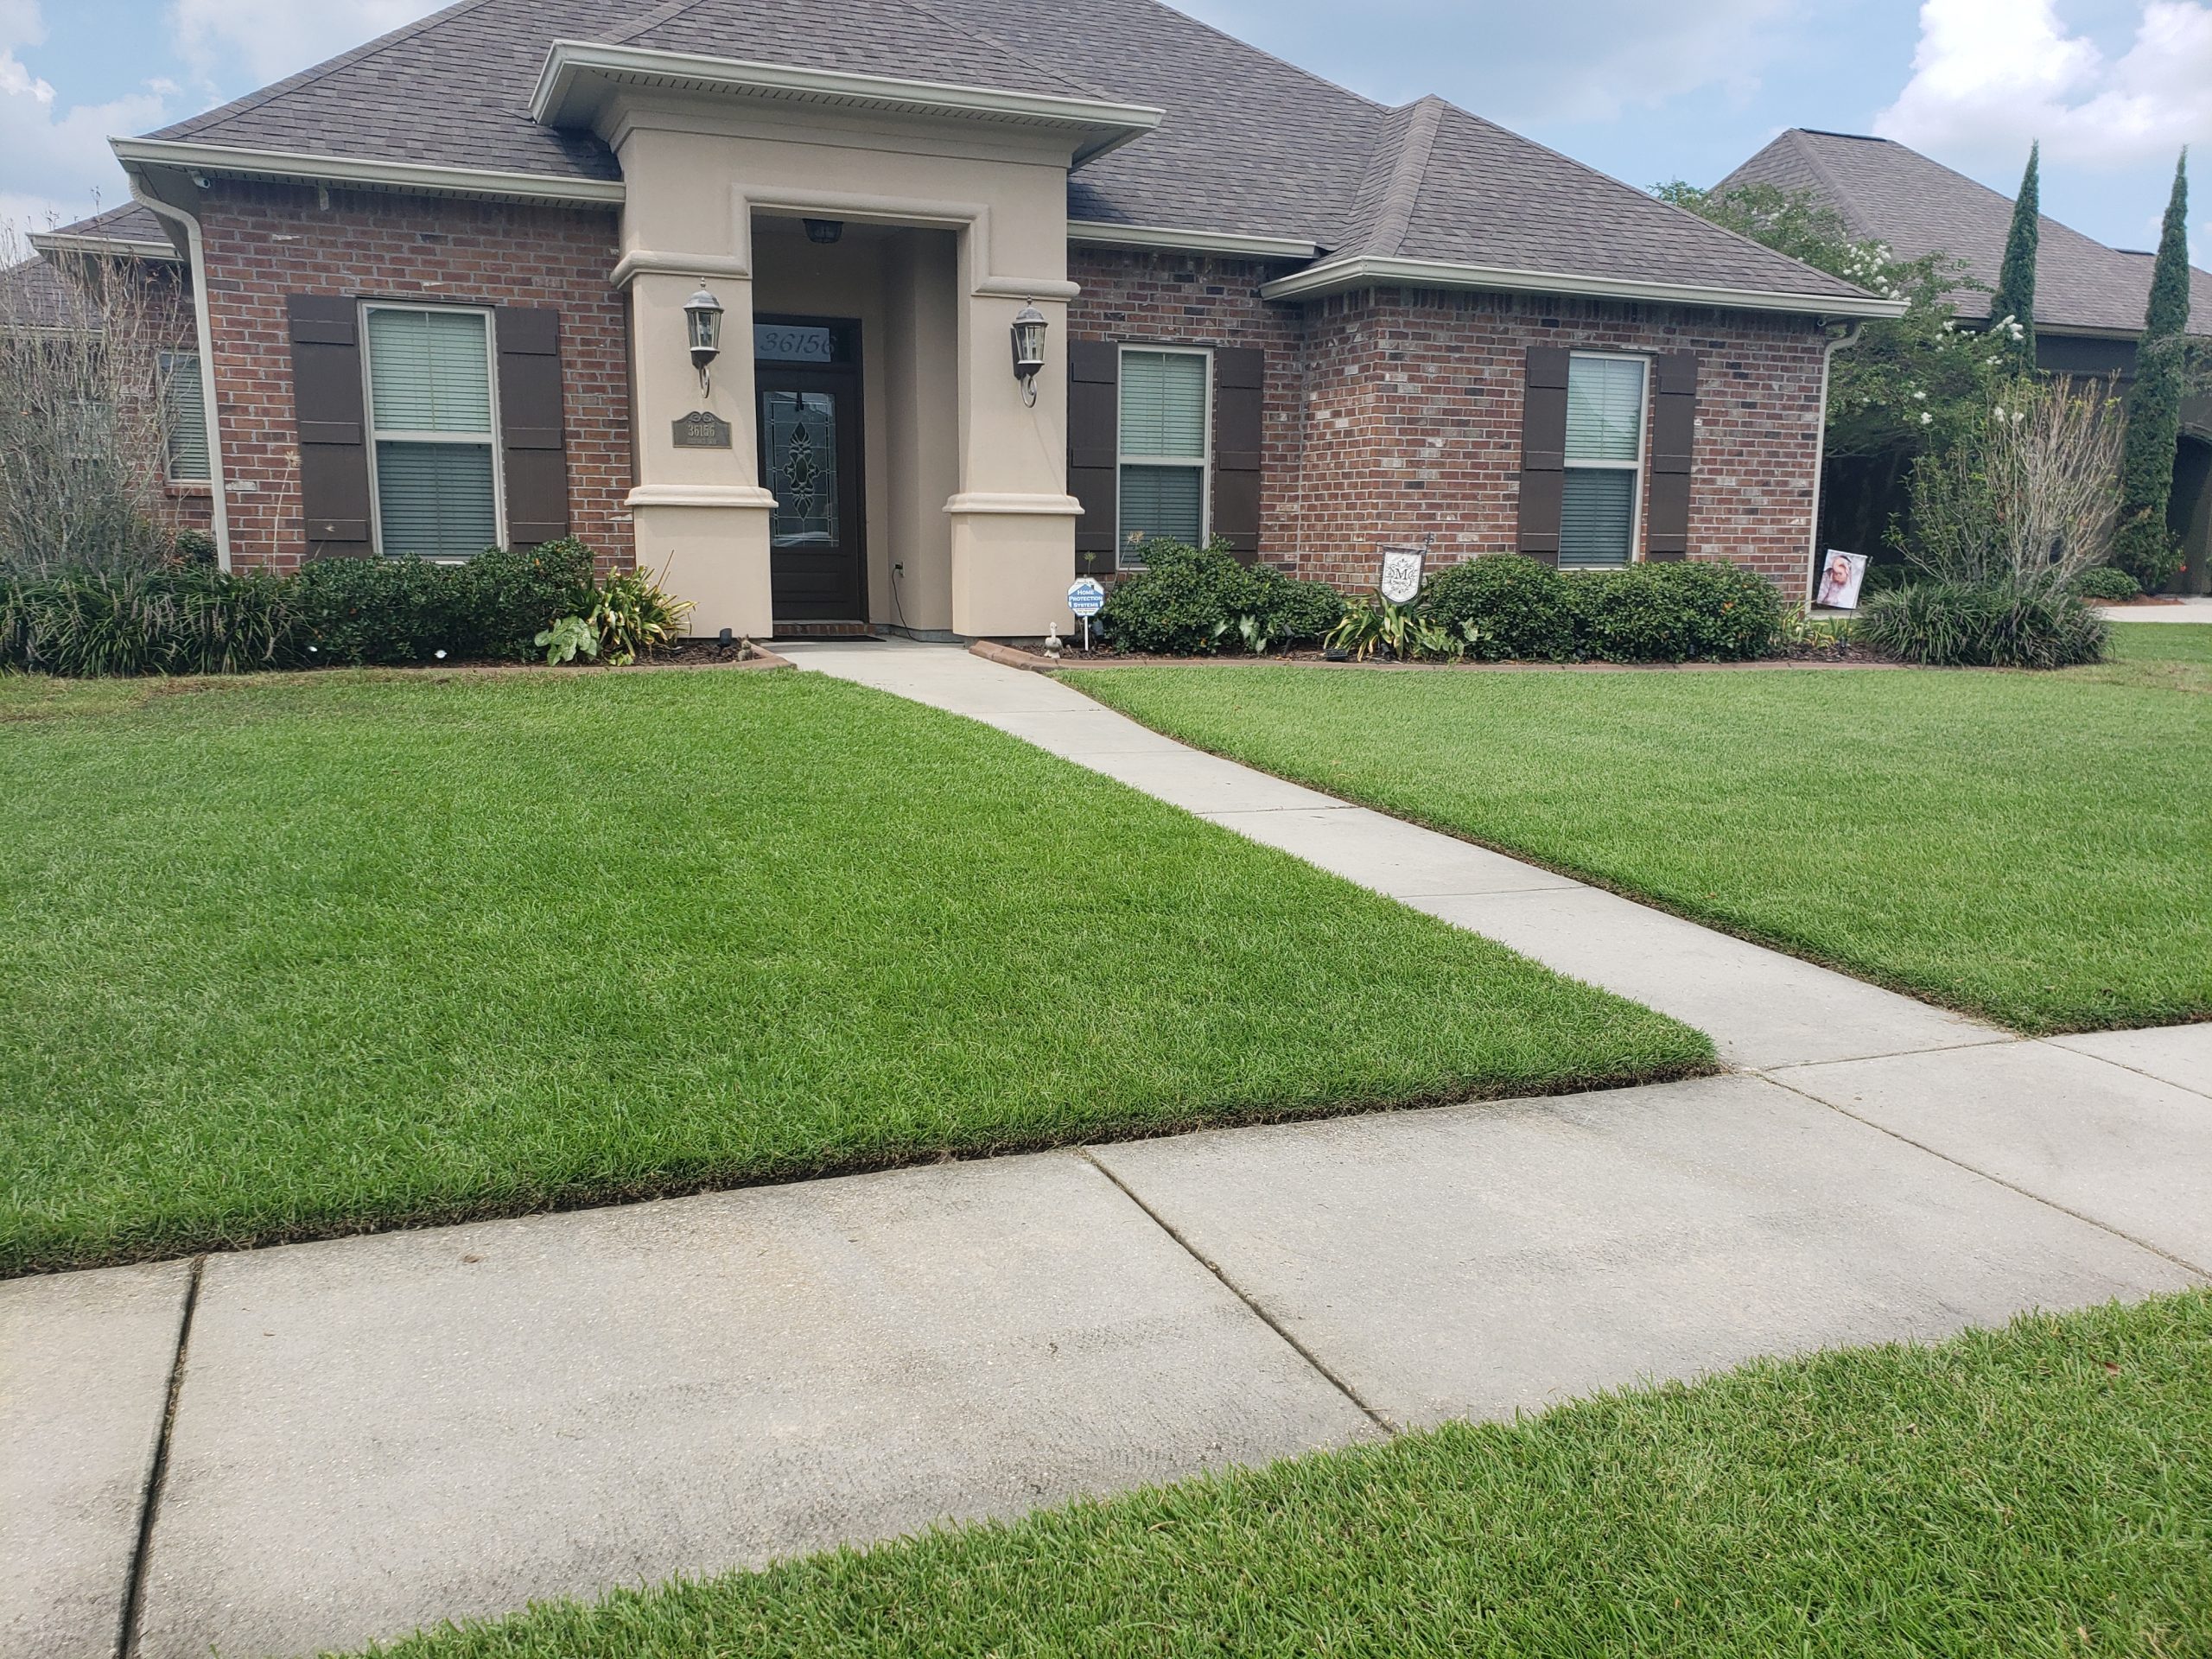 centipede grass sod for sale, delivery, and installation in Jefferson, Metairie, Slidell, Kenner, Gentilly, River Ridge, Harahan, Slidell, LaPlace, and North Shore, Louisiana.